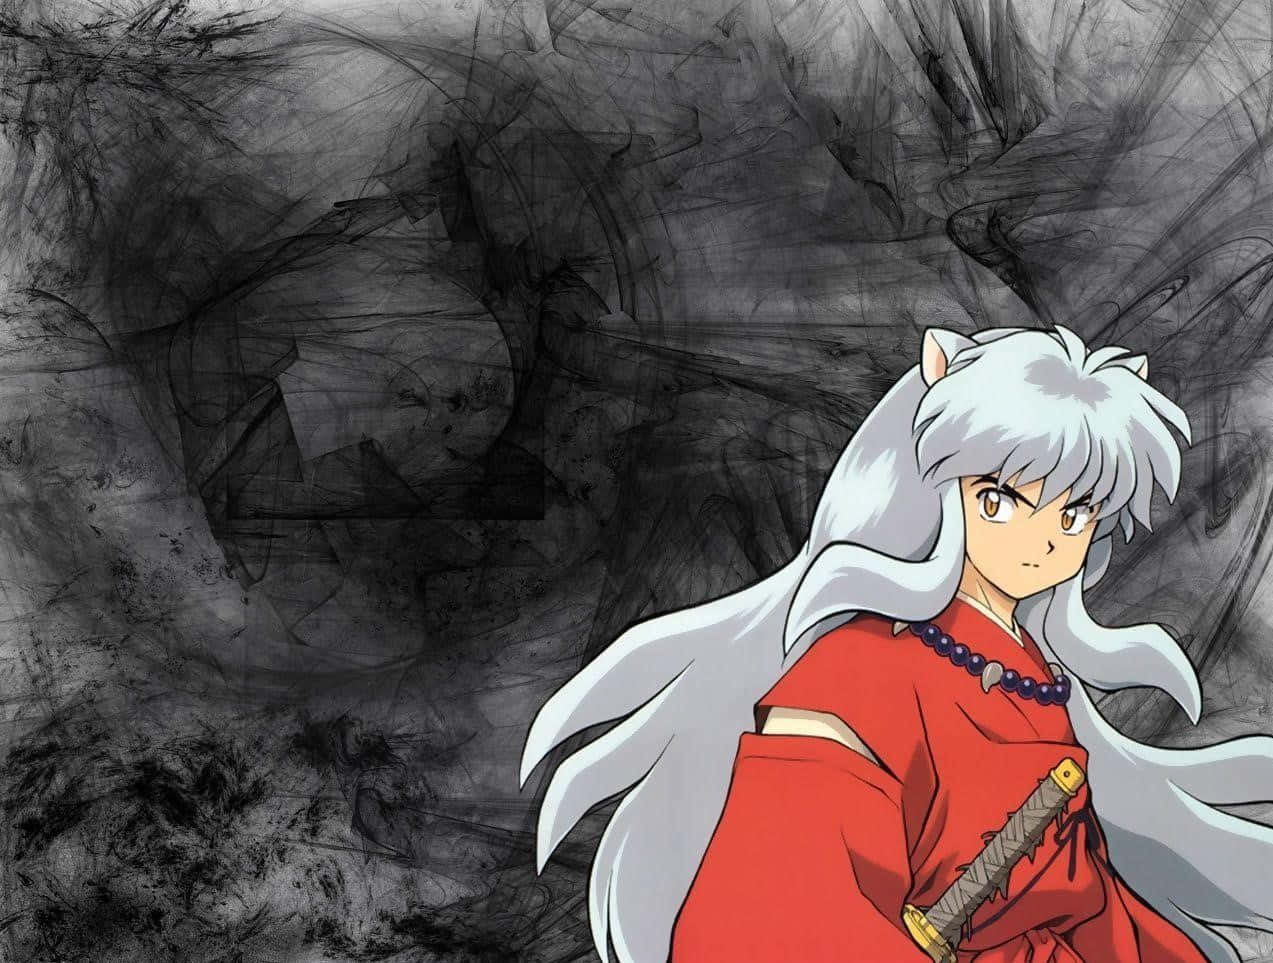 Inuyasha harnessing the power of the Tessaiga